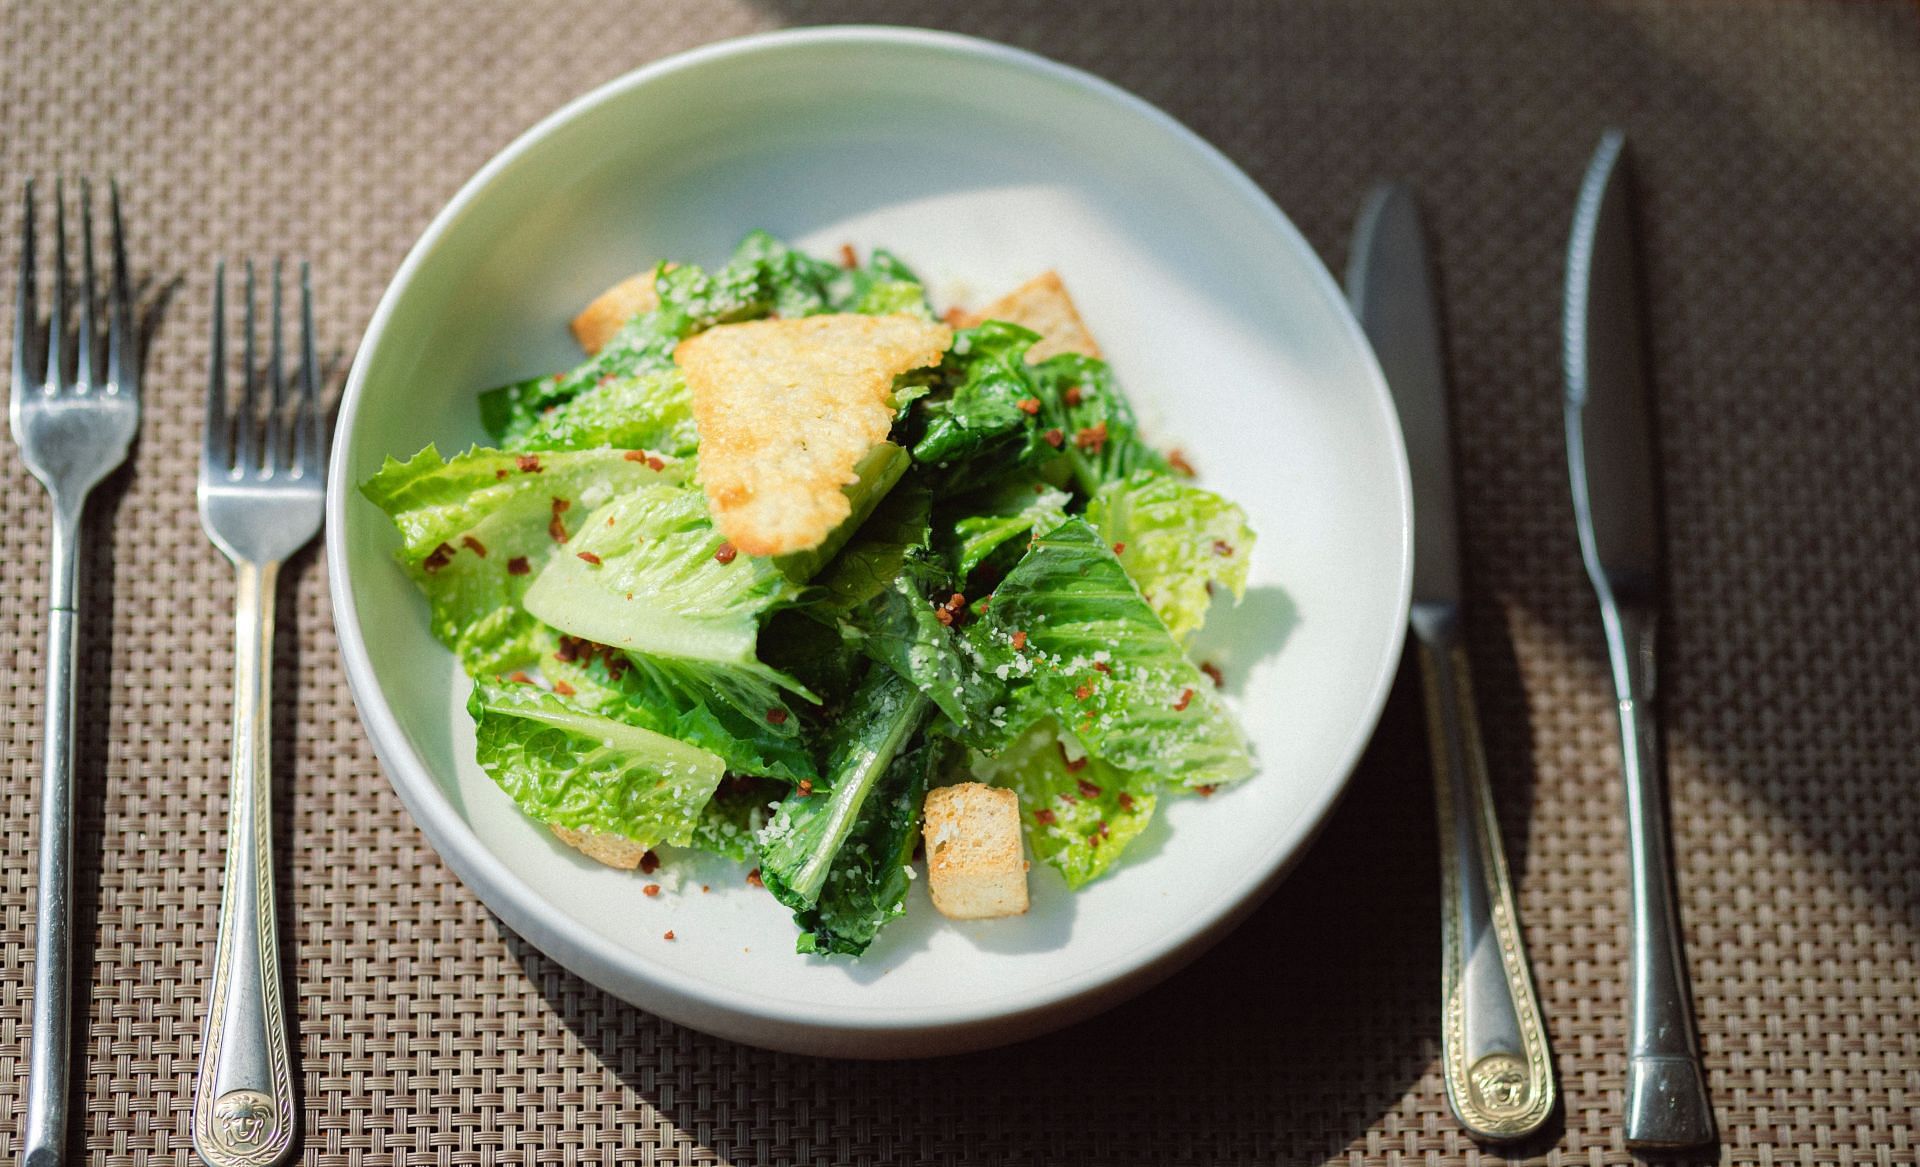 A liver cleanse diet typically consists of leafy greens and healthy fruits, (Image via Unsplash/Hanxiao)